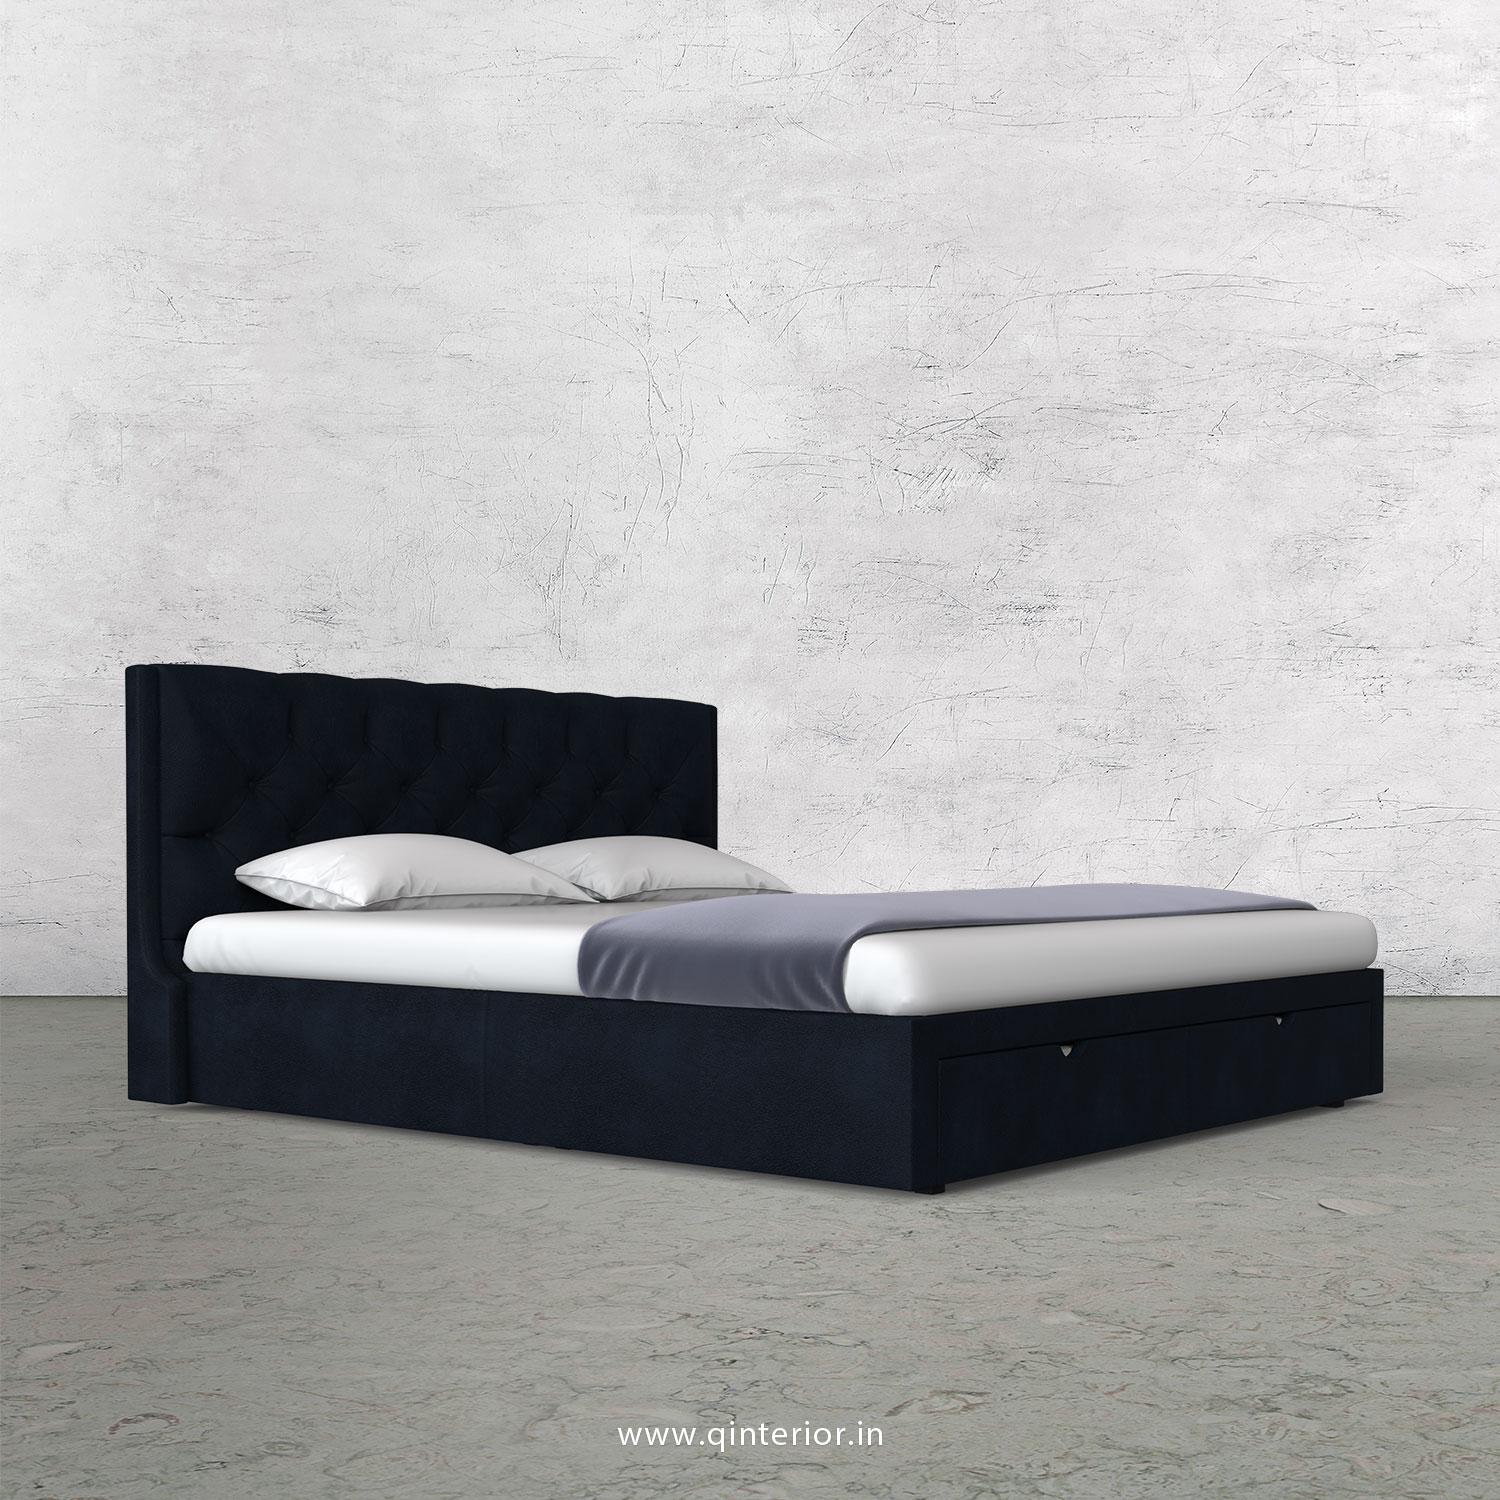 Scorpius Queen Storage Bed in Fab Leather Fabric - QBD001 FL05